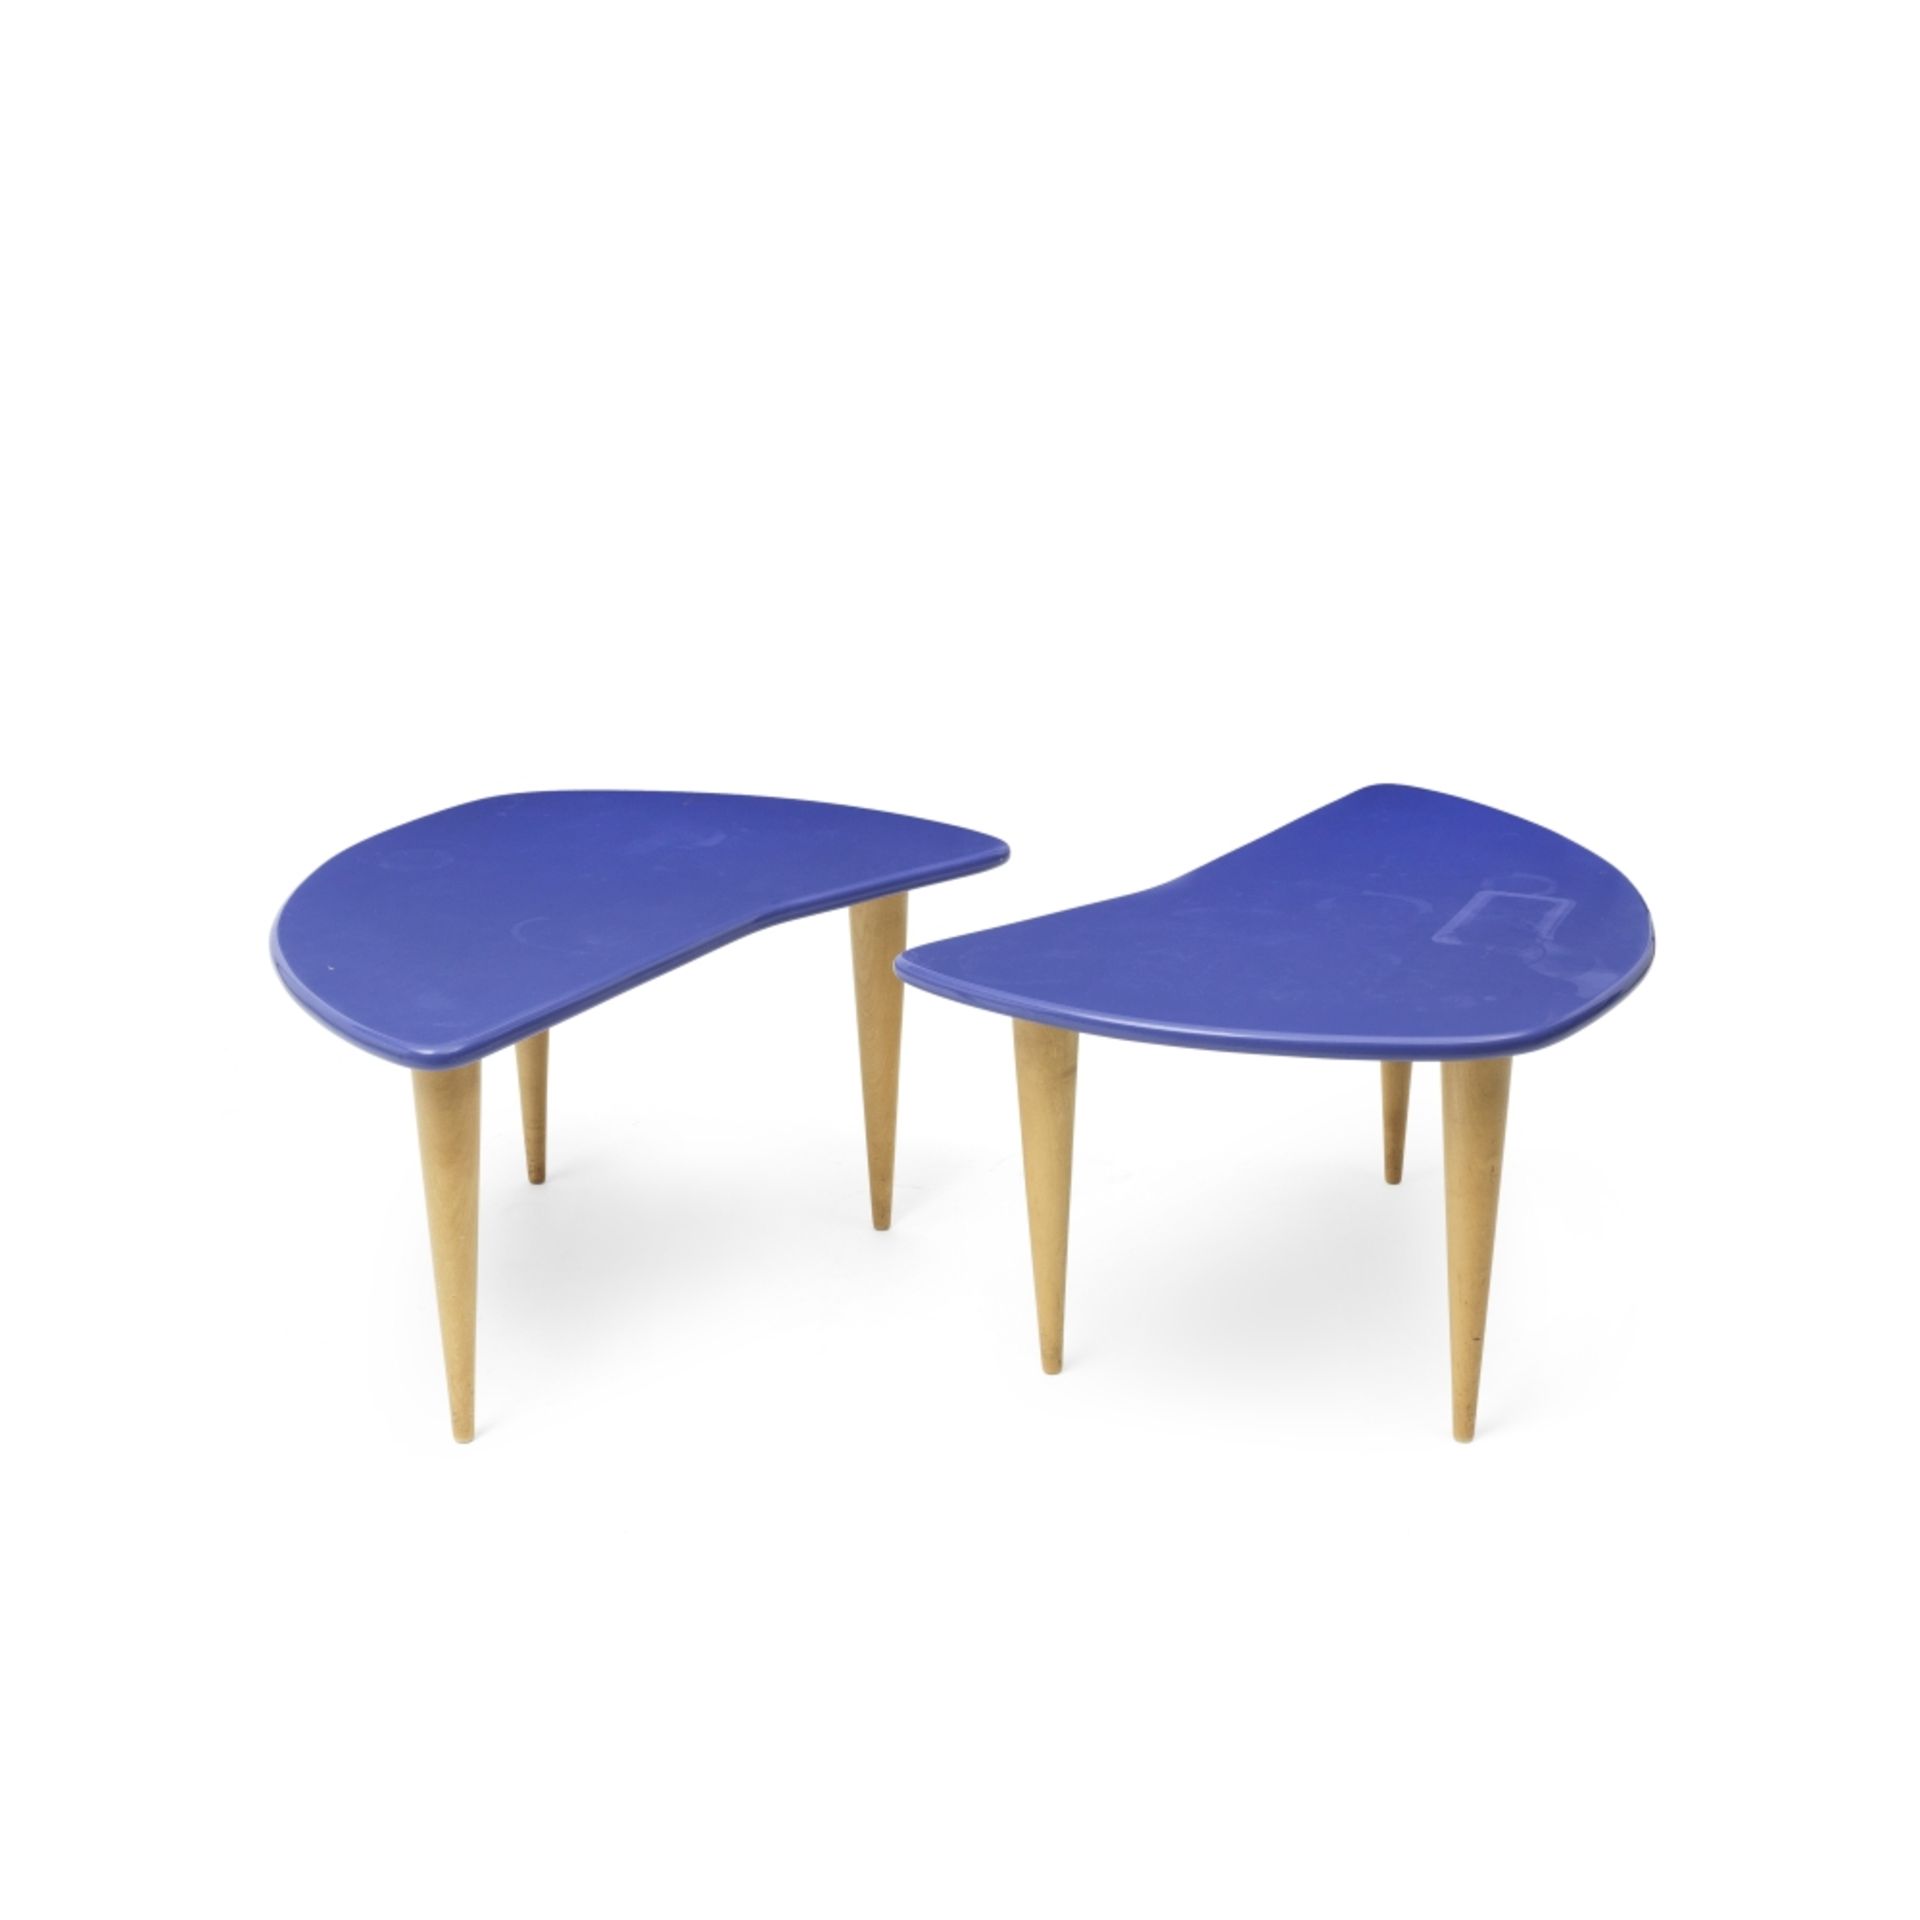 A pair of 'Byrrh' occasional tables Designed by Sir Terence Conran after a Byrrh ashtray (3)